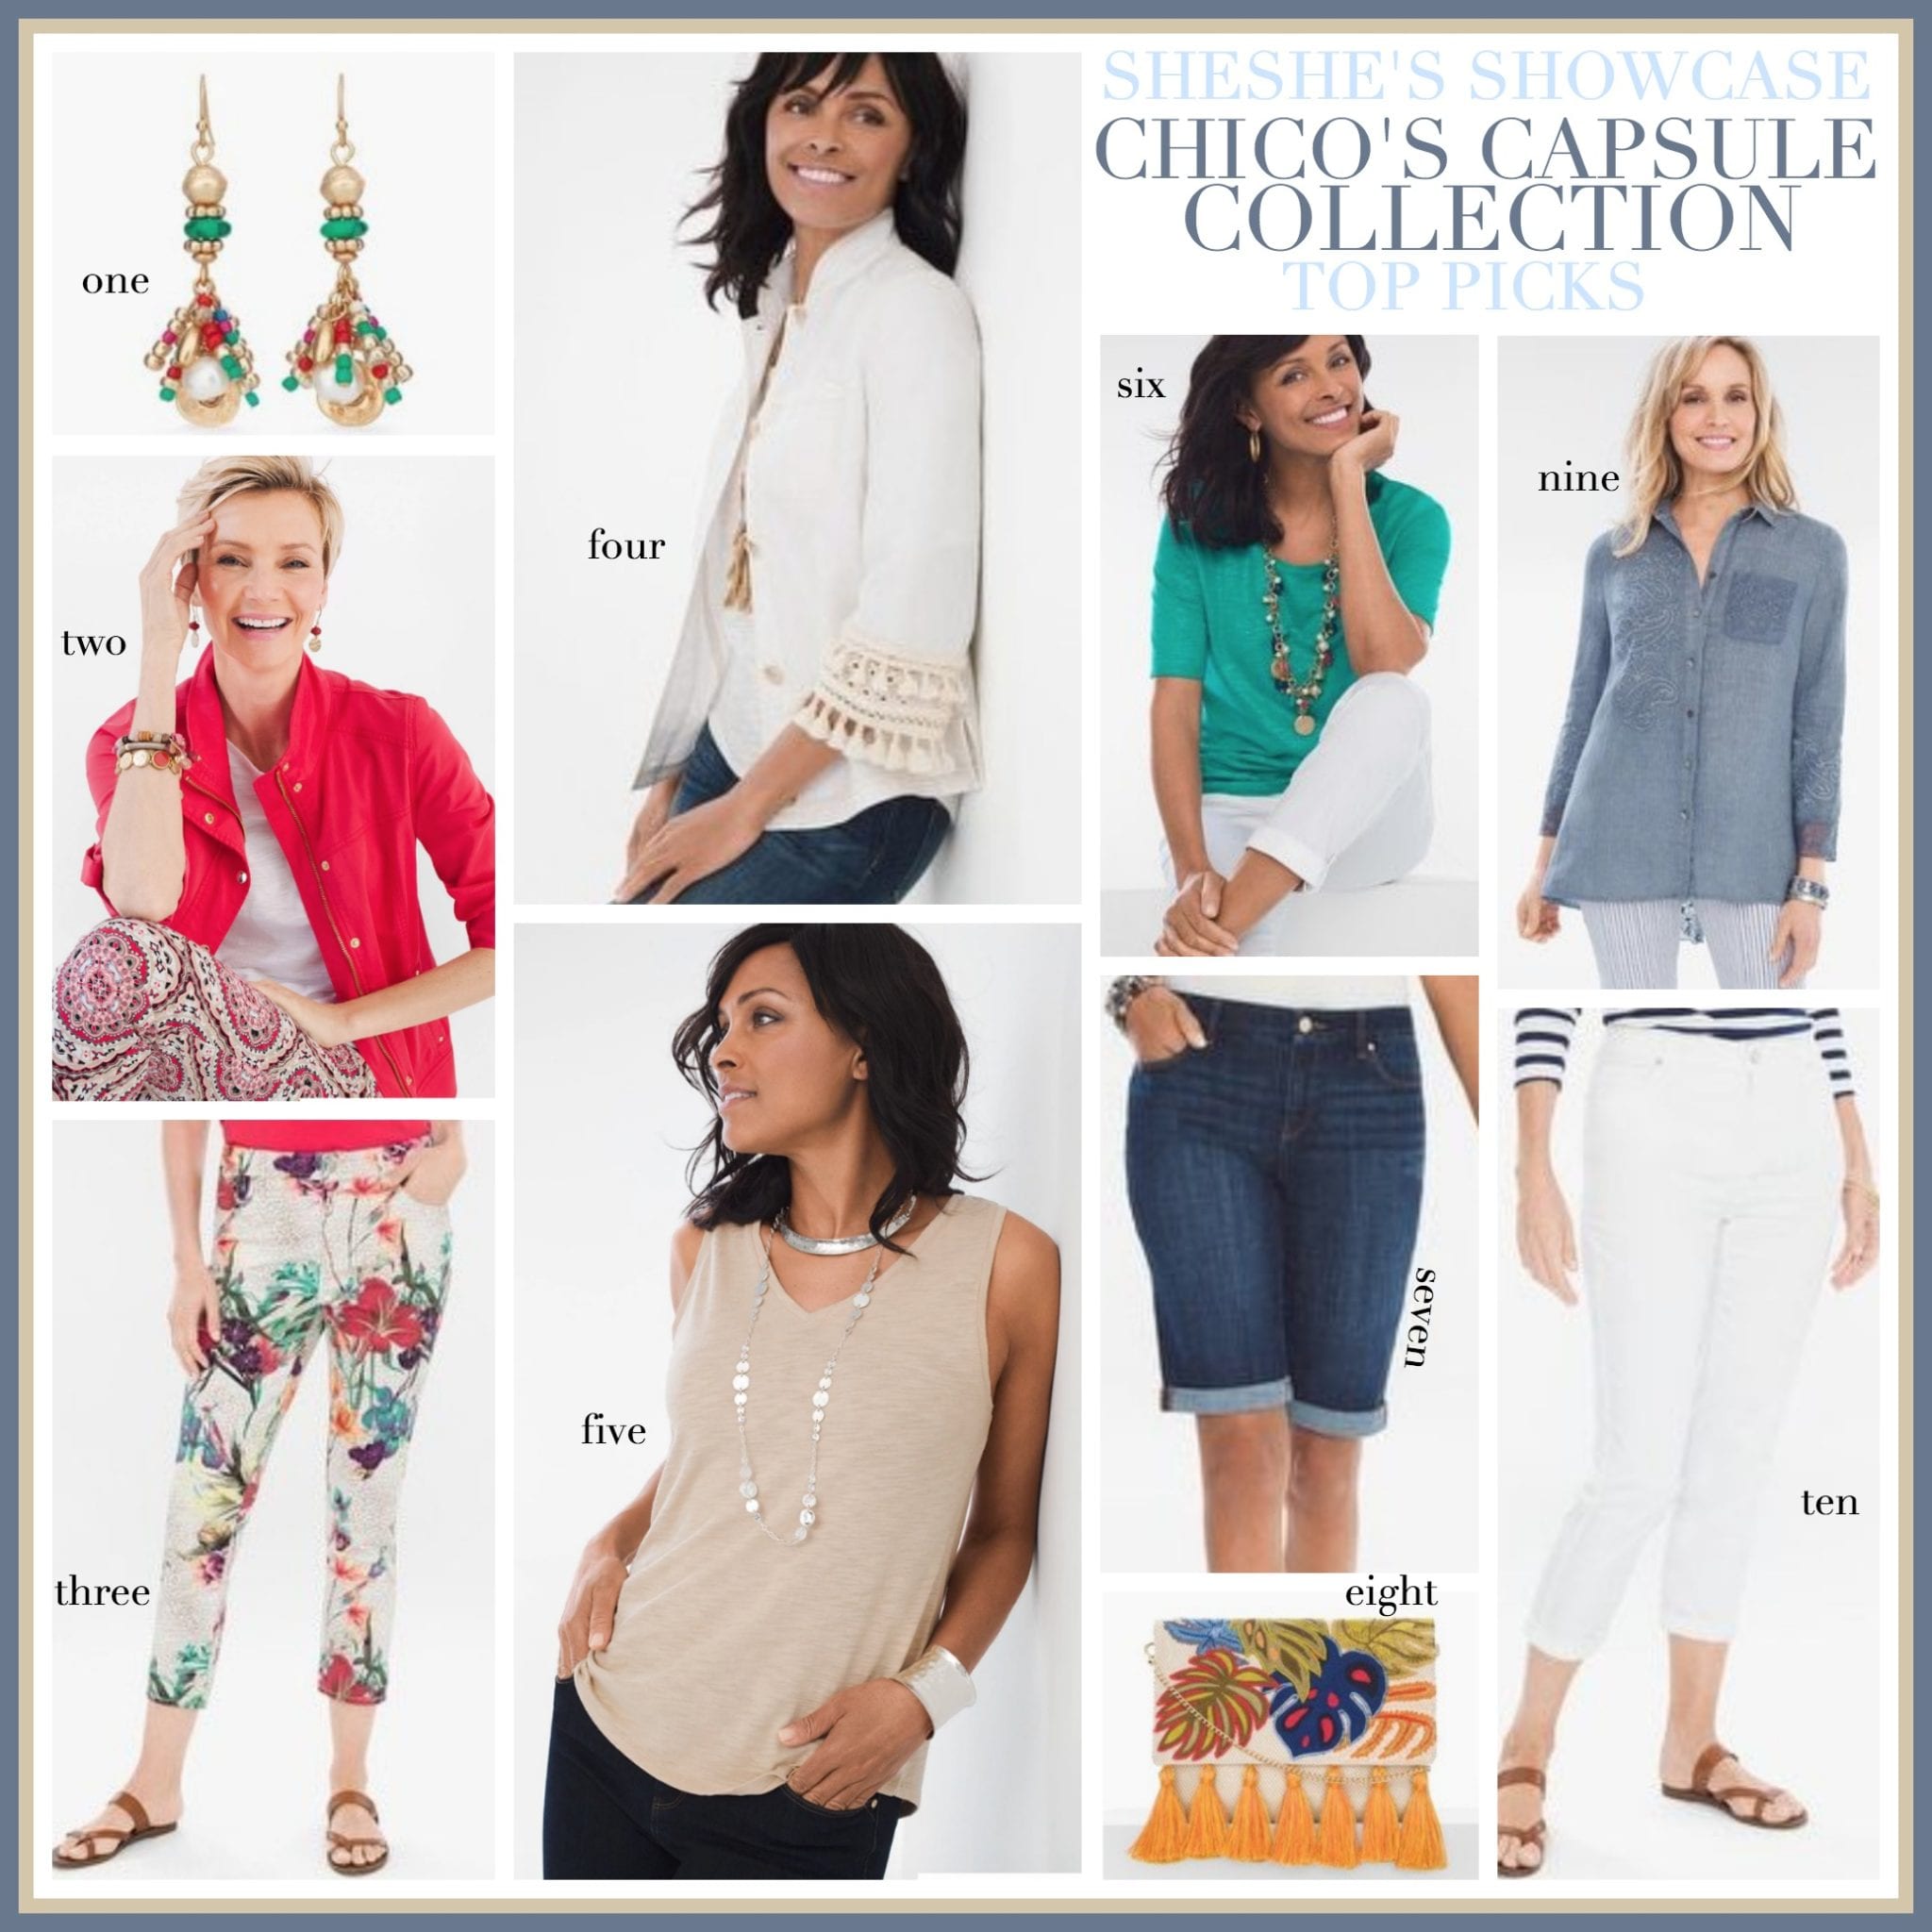 chicos capsule collection, chicos clothing